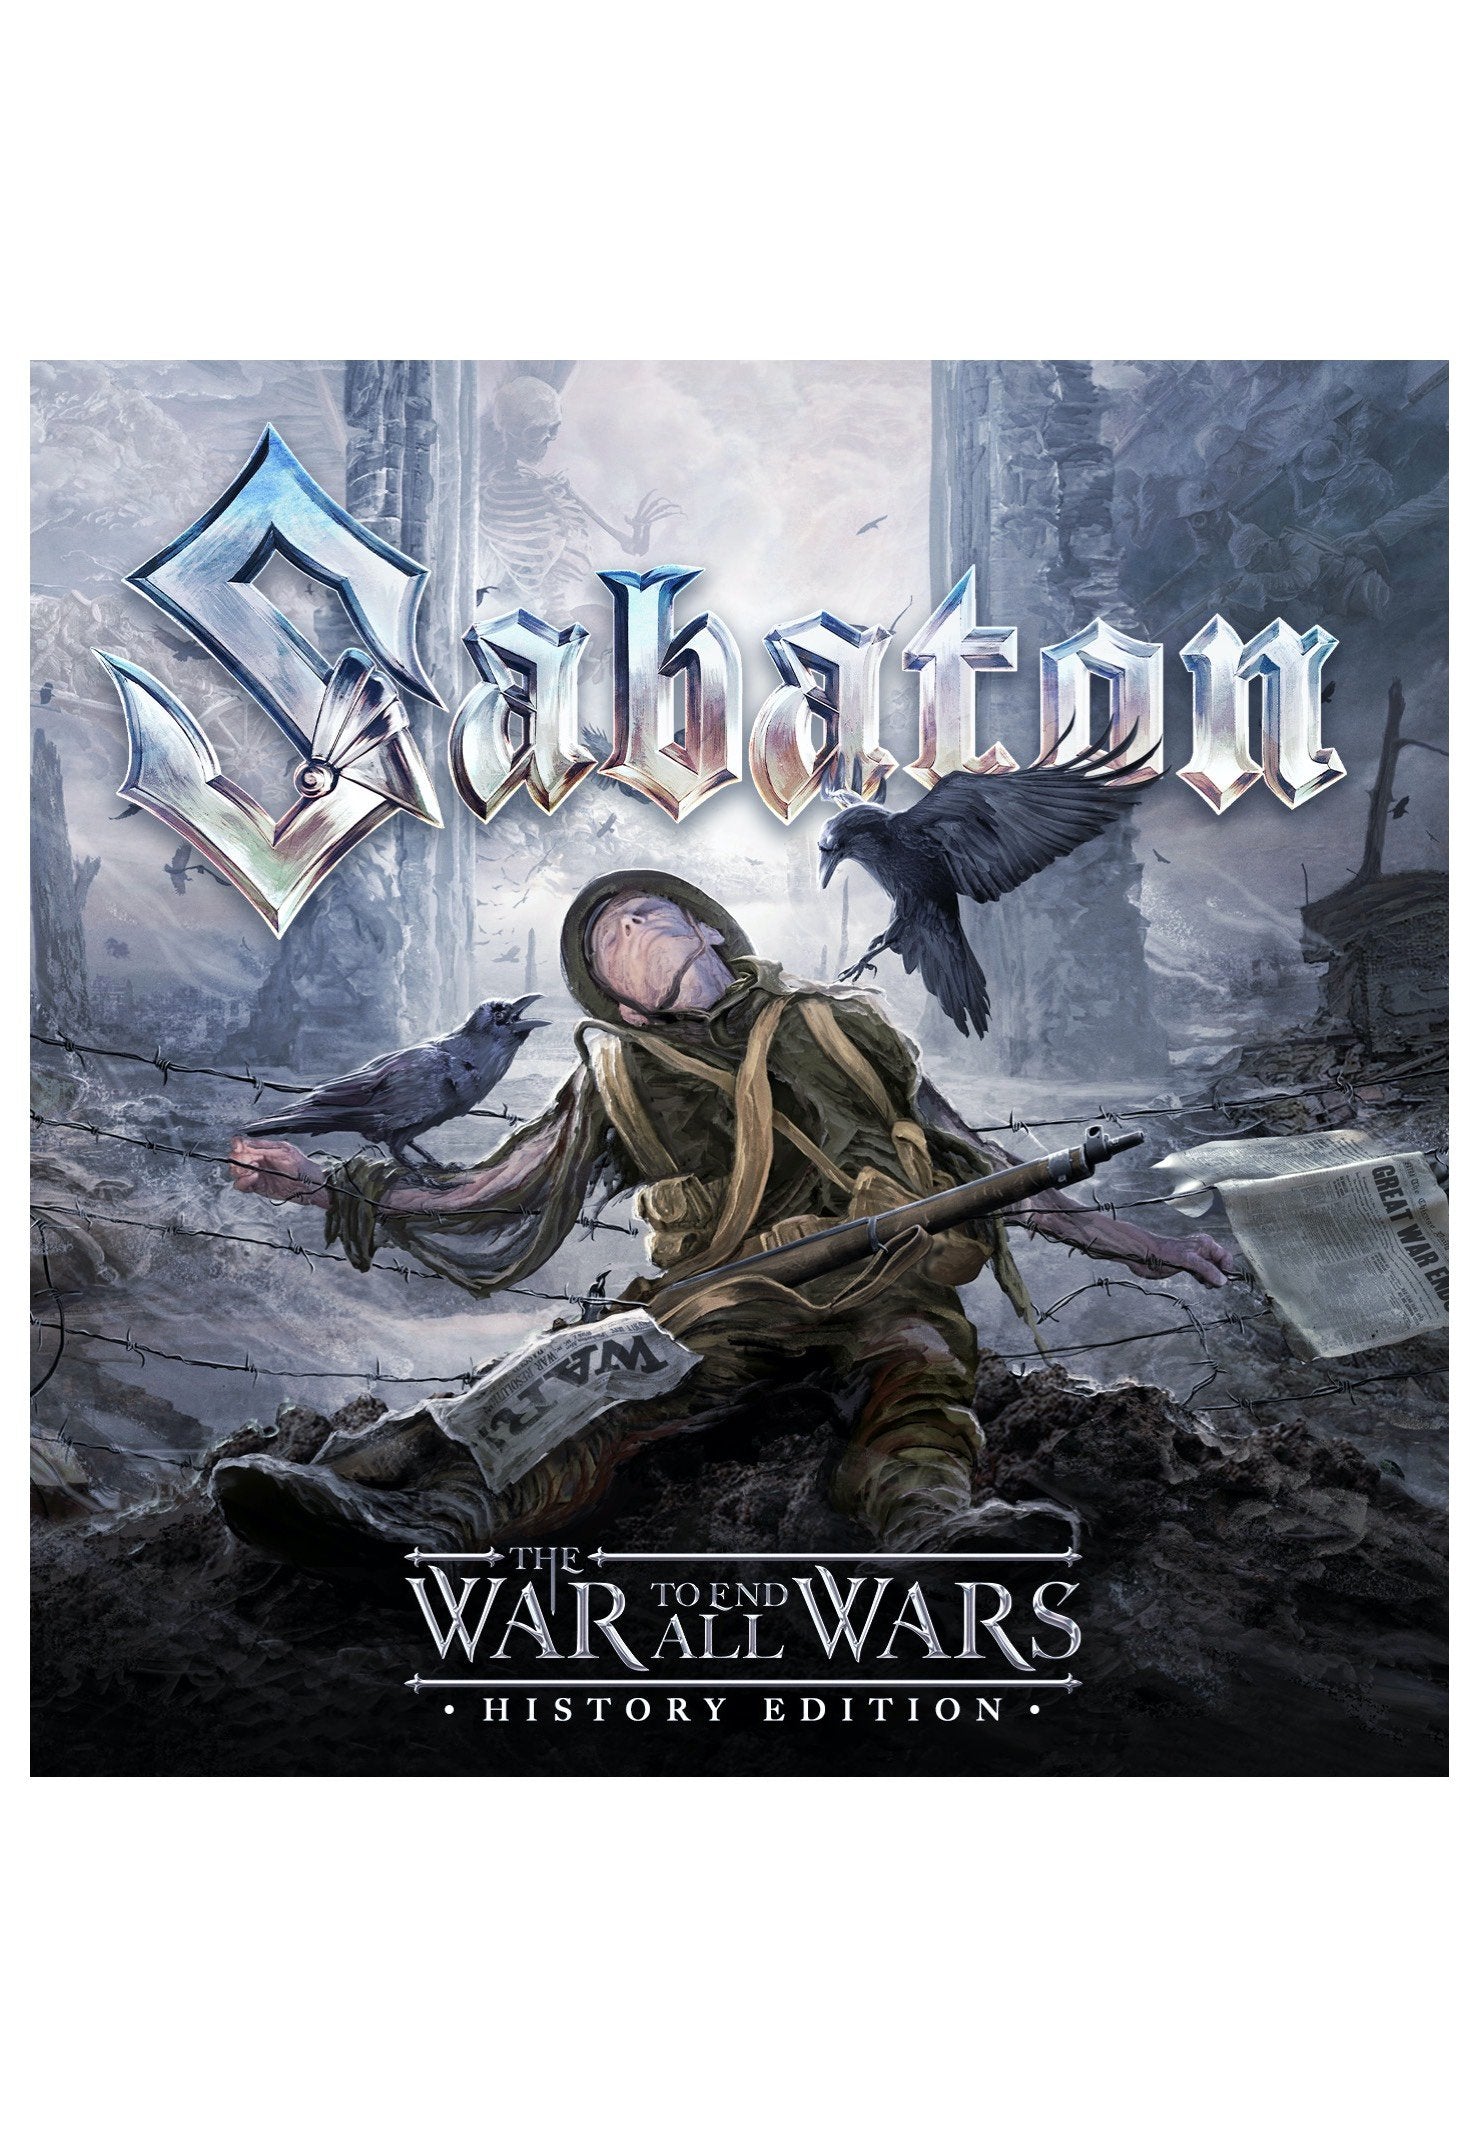 Sabaton - The War To End All Wars Ltd. History Edition - Digibook CD